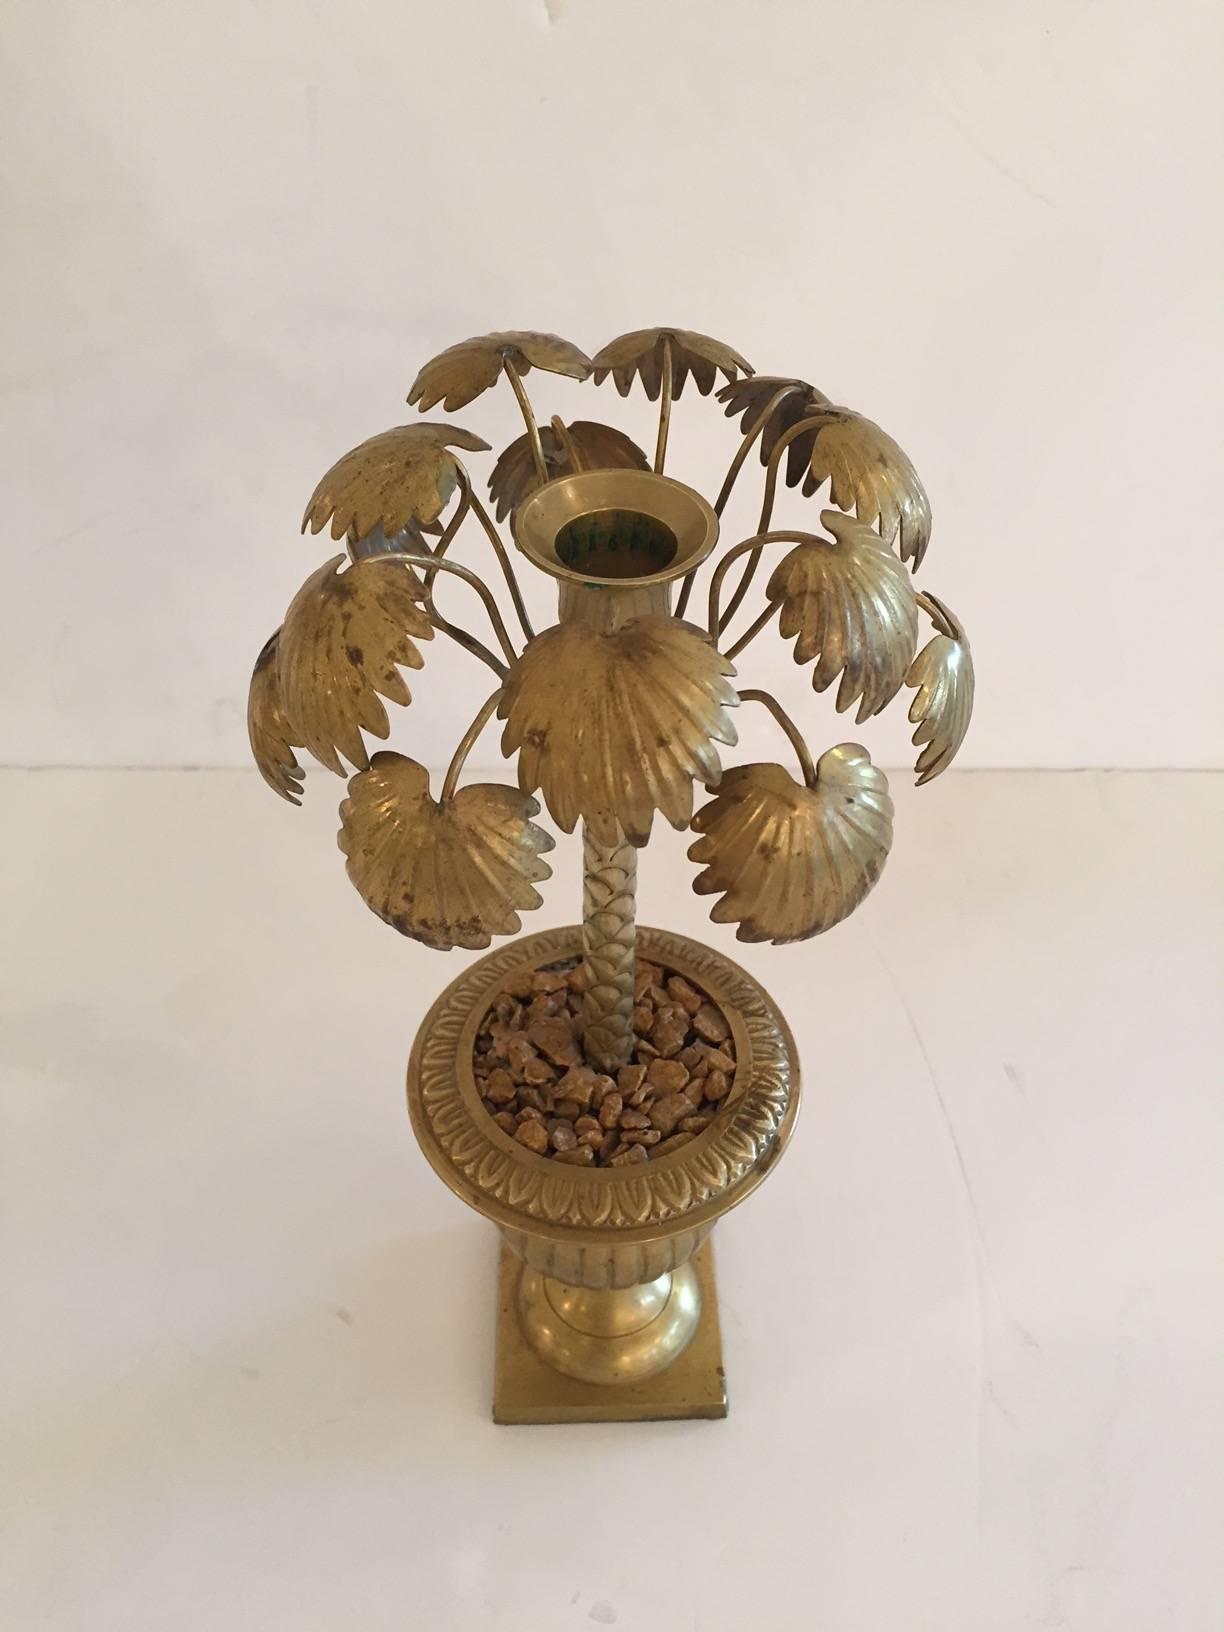 Super stylish and fun set of four brass candlesticks that look like potted palm trees.
   